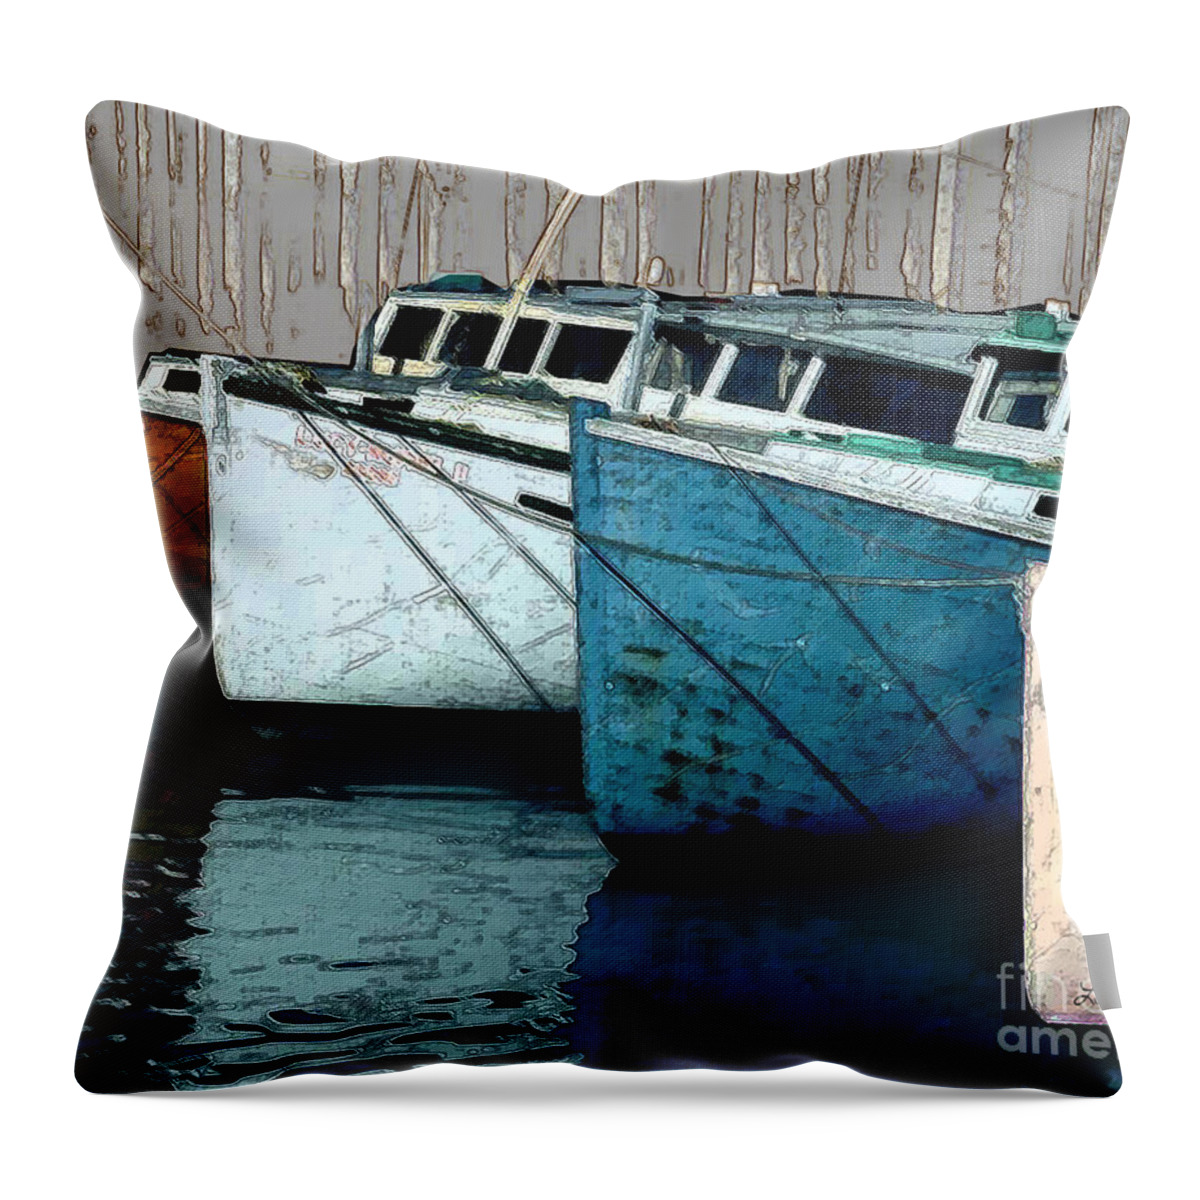 Lee Owenby Throw Pillow featuring the photograph Four Boats In Blue #1 by Lee Owenby